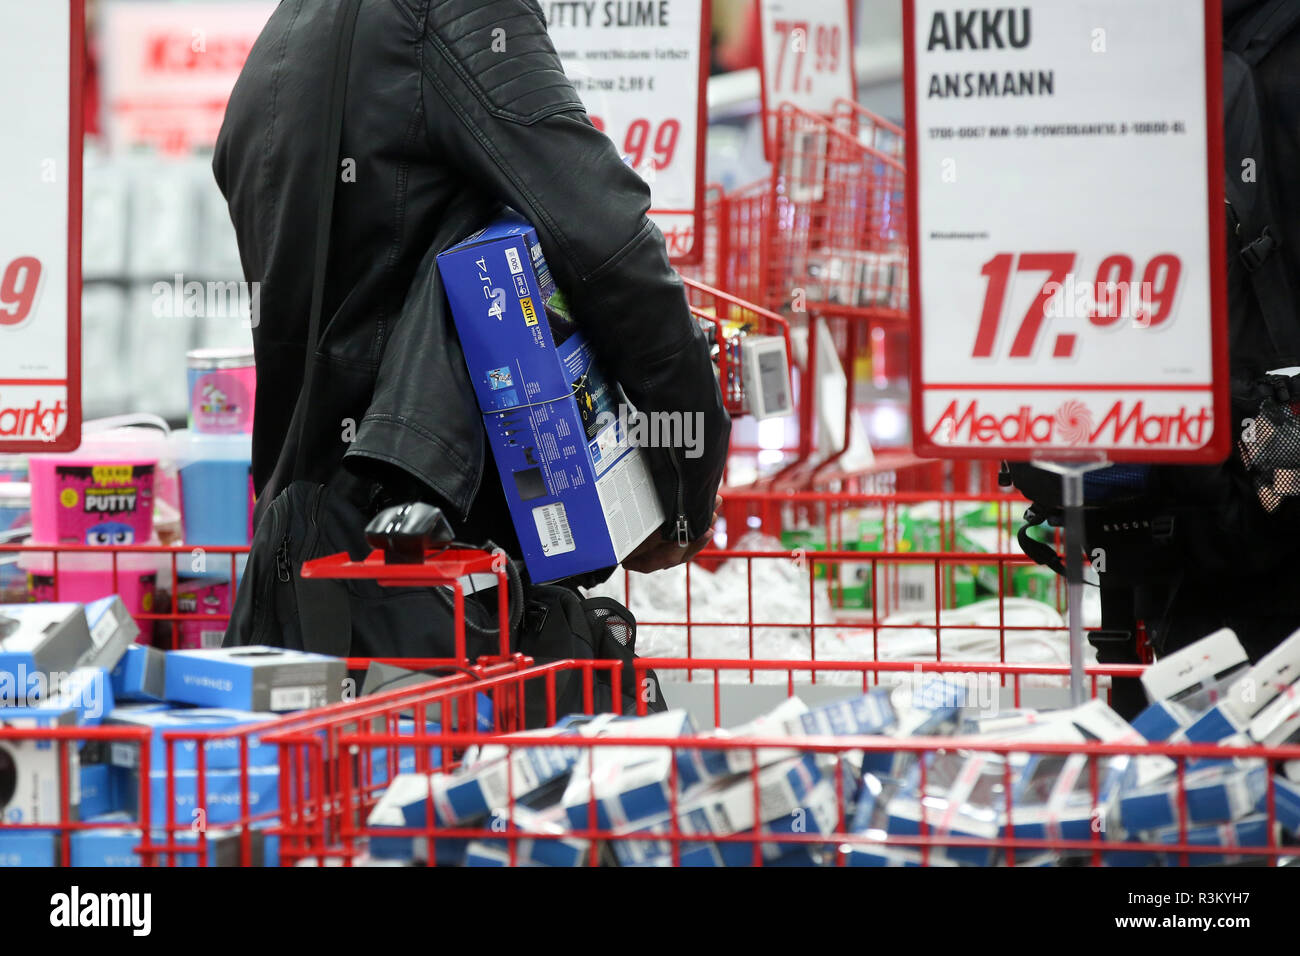 23 November 2018, Hamburg: On the "Black Friday" discount in a Media Markt store, customers queue up at the checkout counters. According to estimates by Handelsverband Deutschland (HDE), the discount